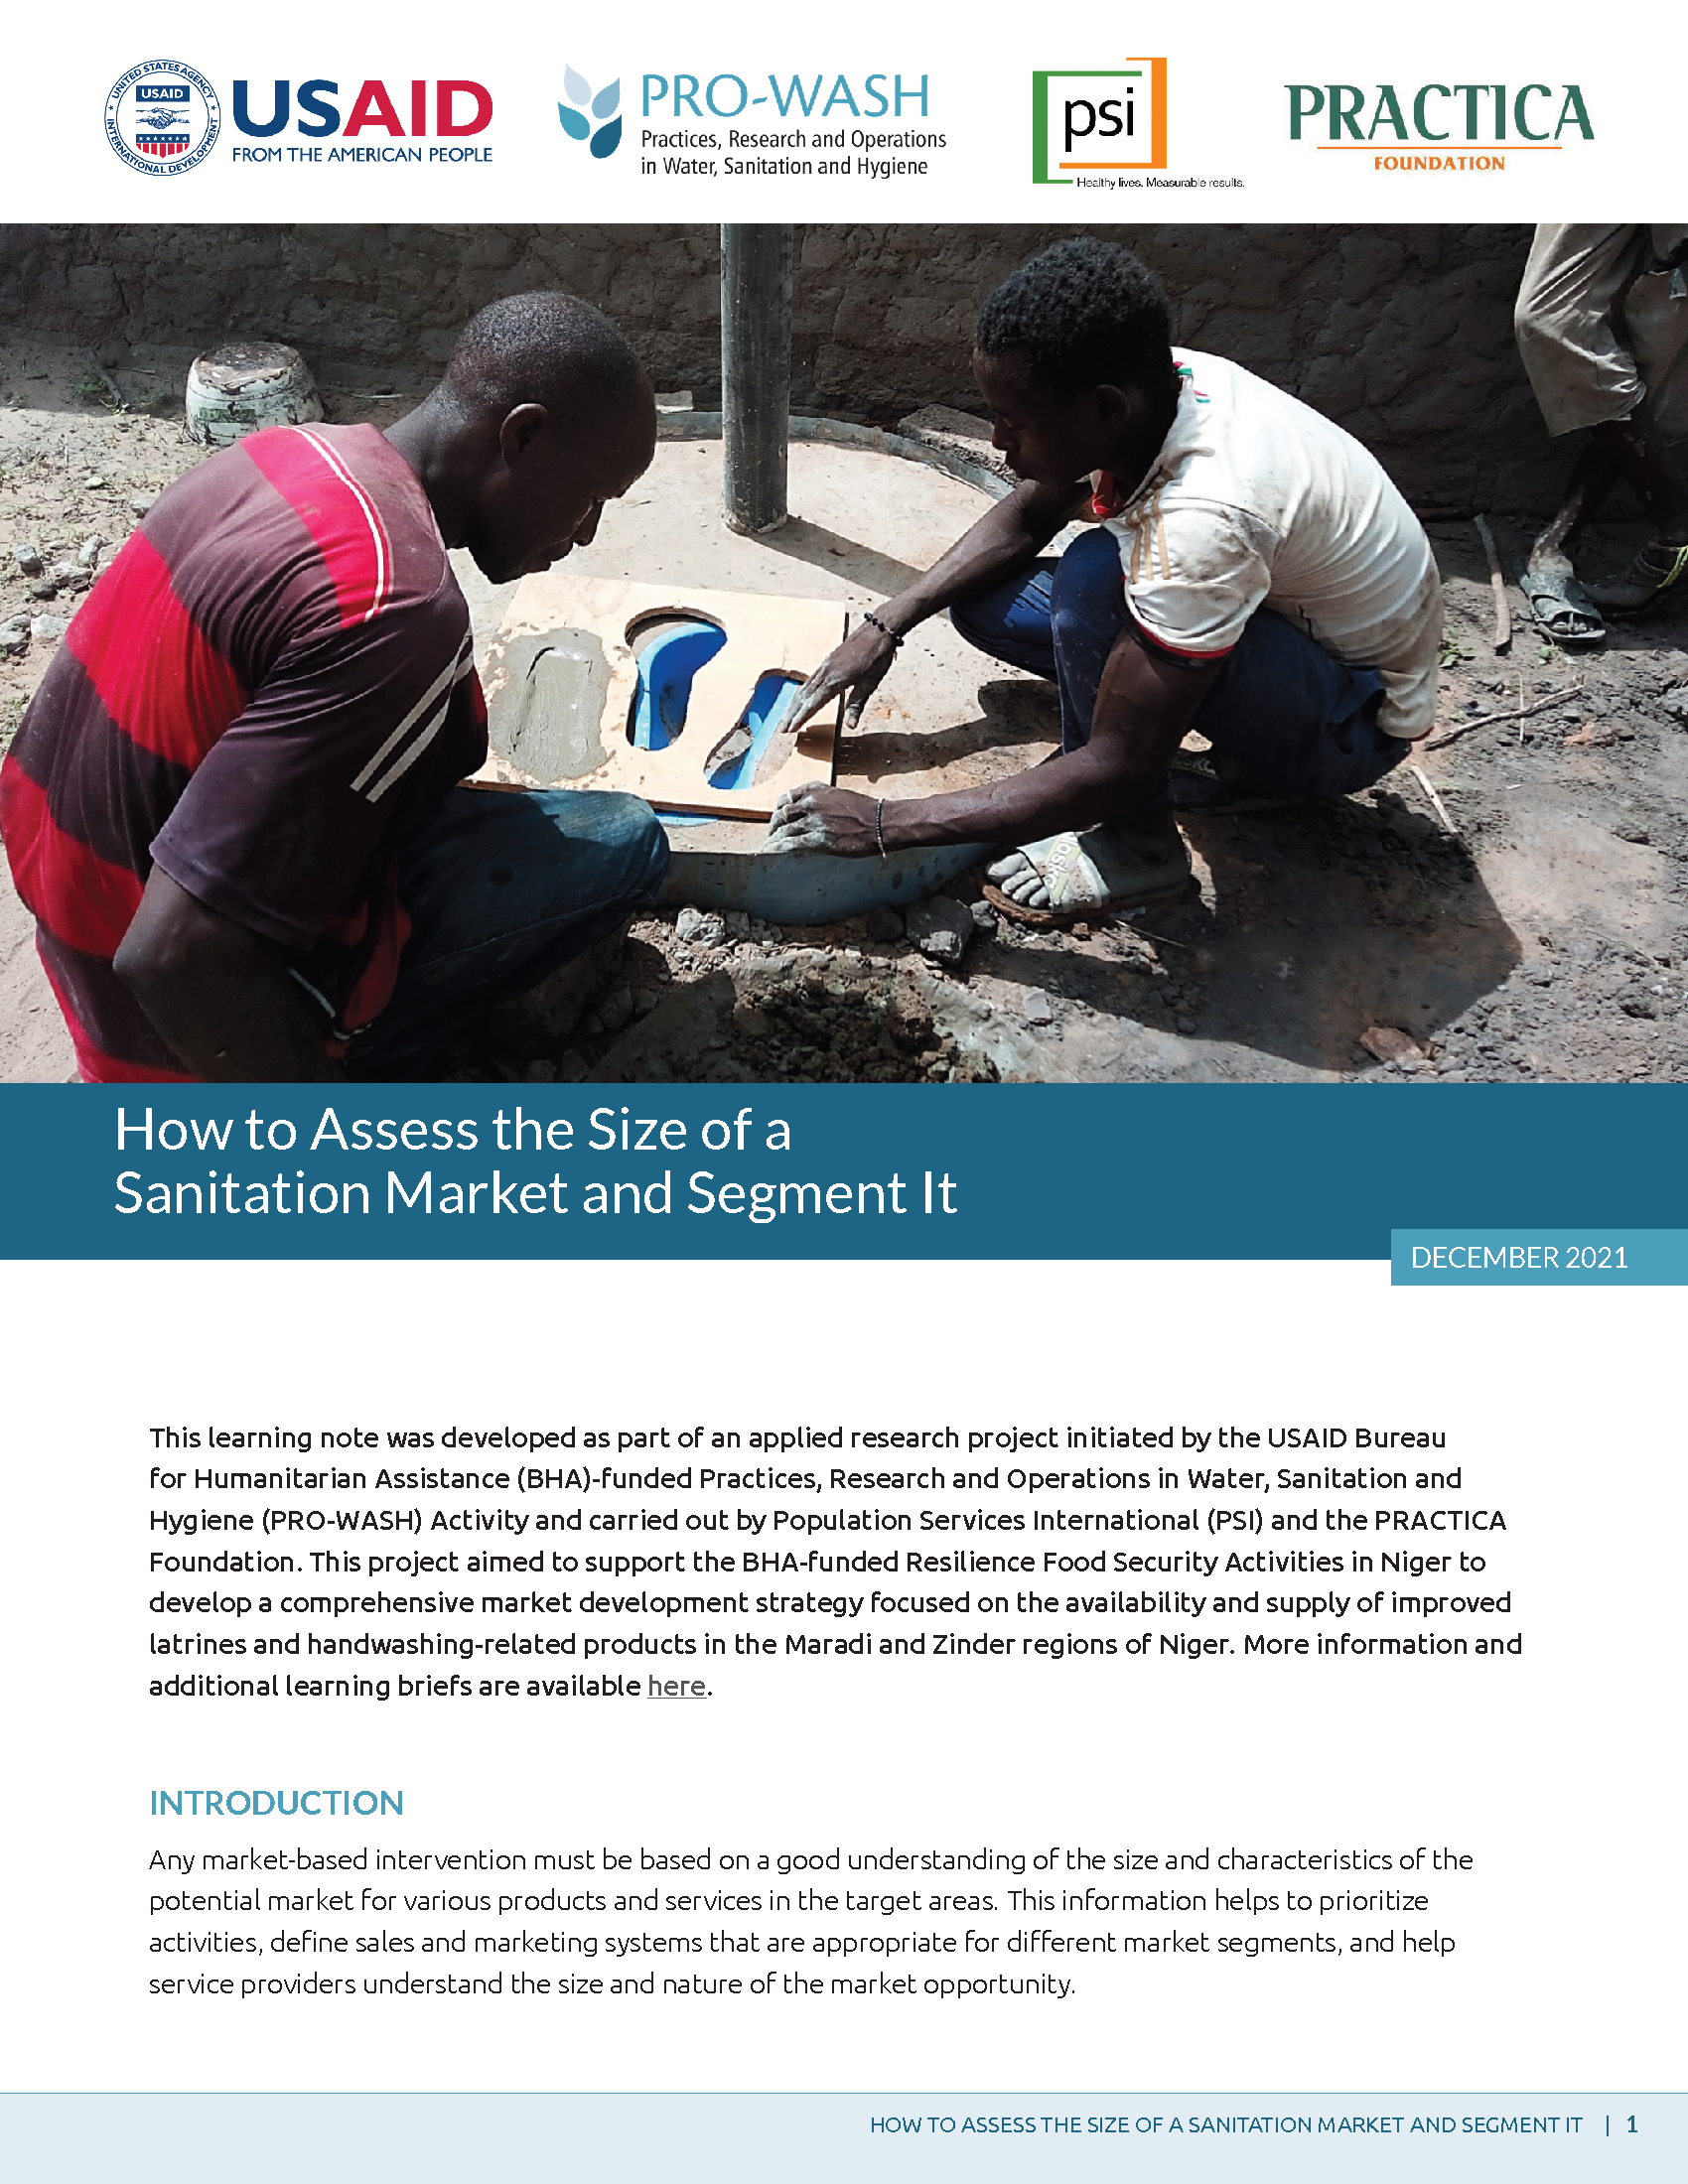 Cover page for How to Assess the Size of a Sanitation Market and Segment It